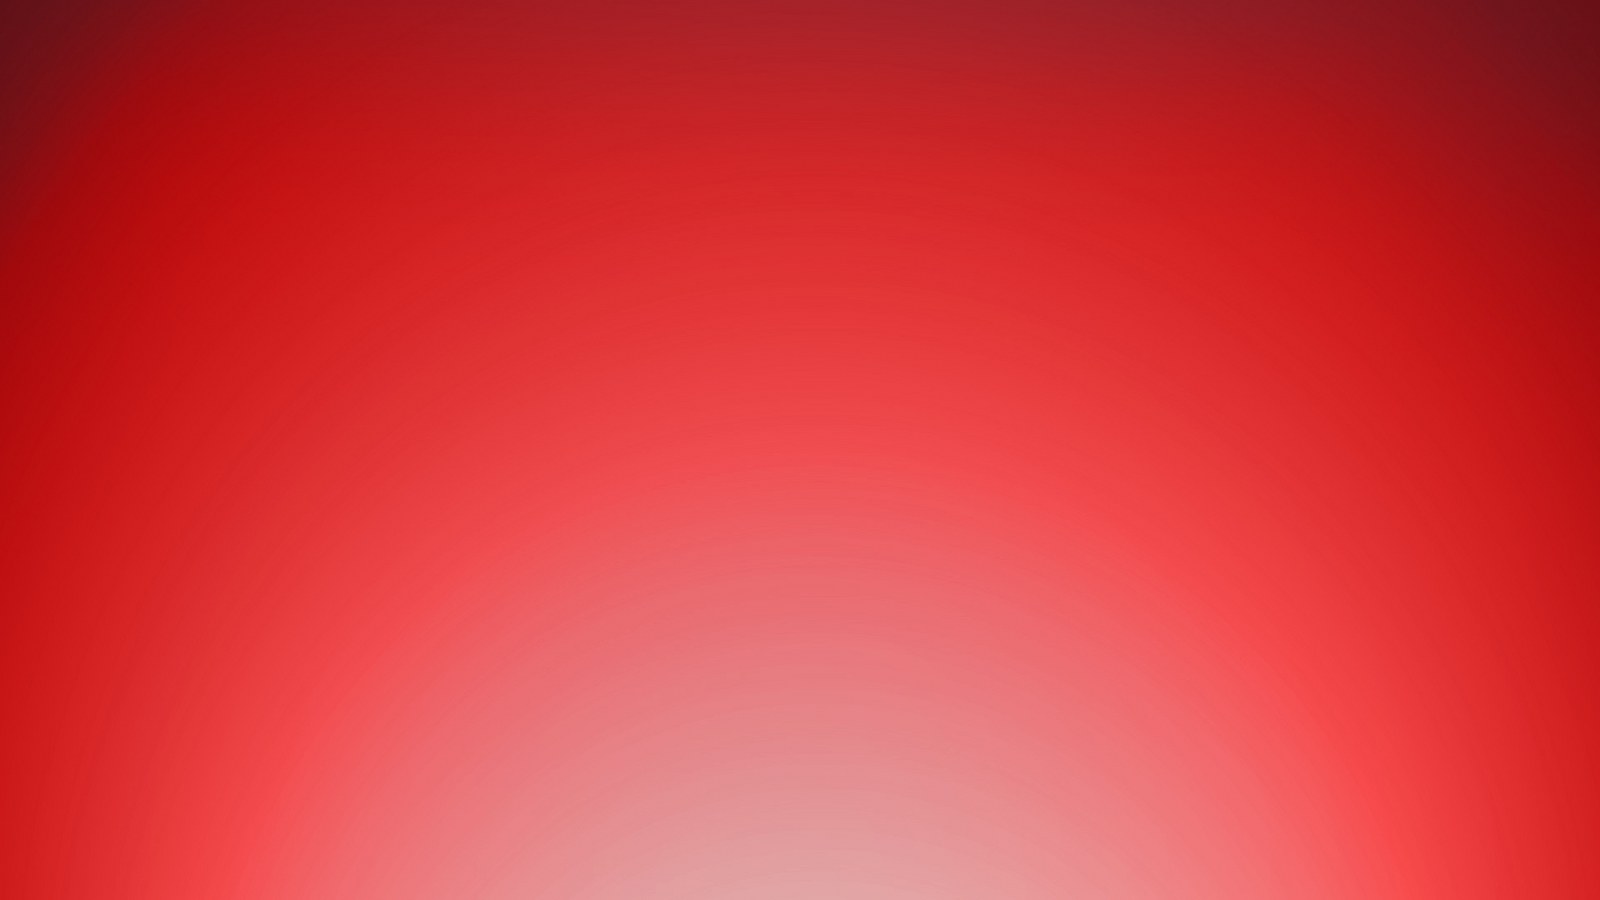 Image Red Background Wallpaper Texture Jpg Heroes Wiki